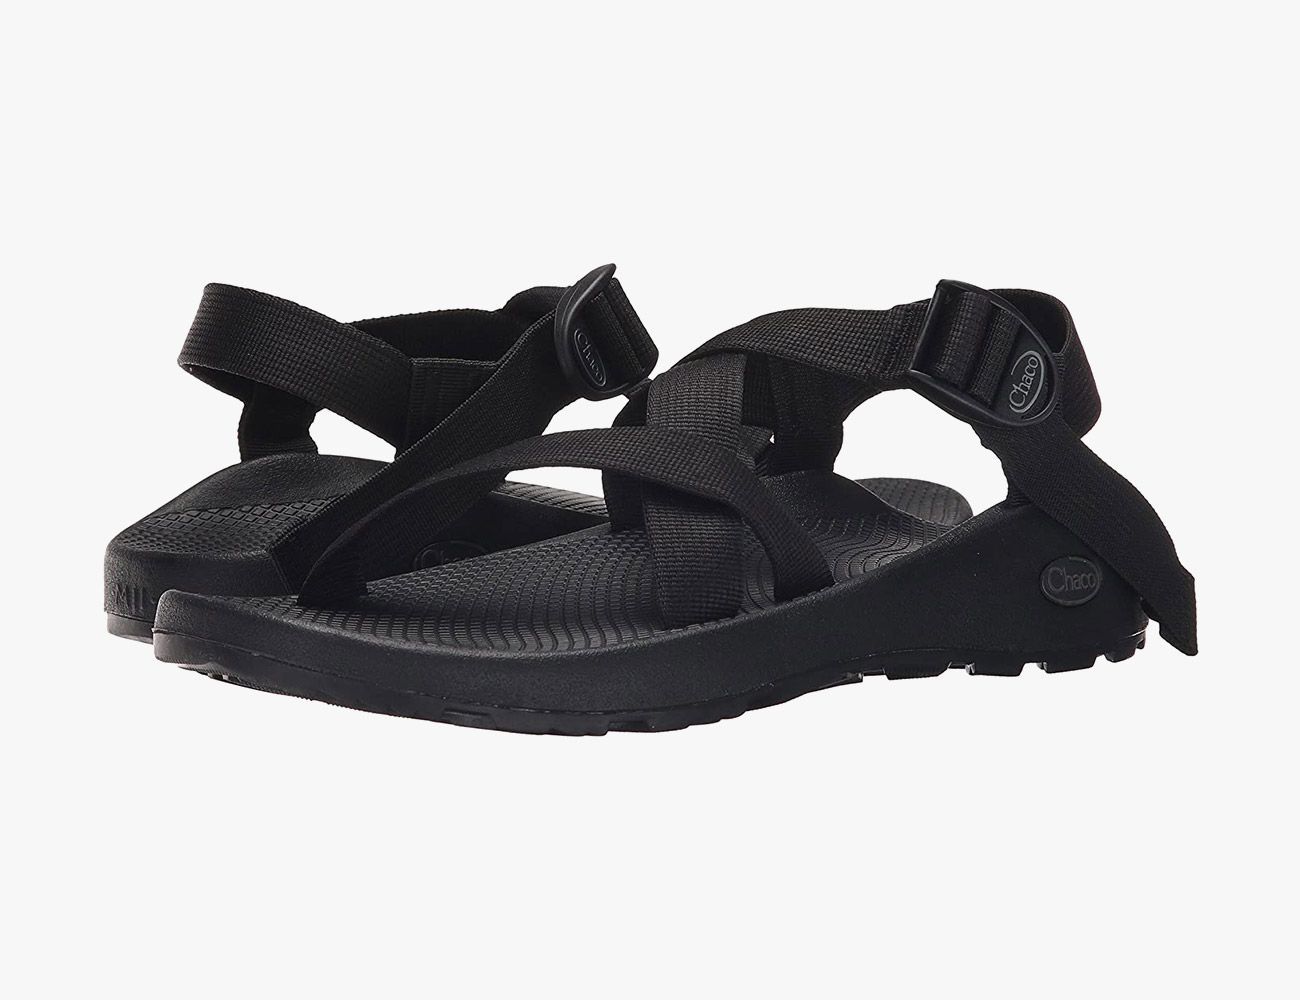 Chaco vs Teva: Which Outdoor Sandal Brand Should You Choose?